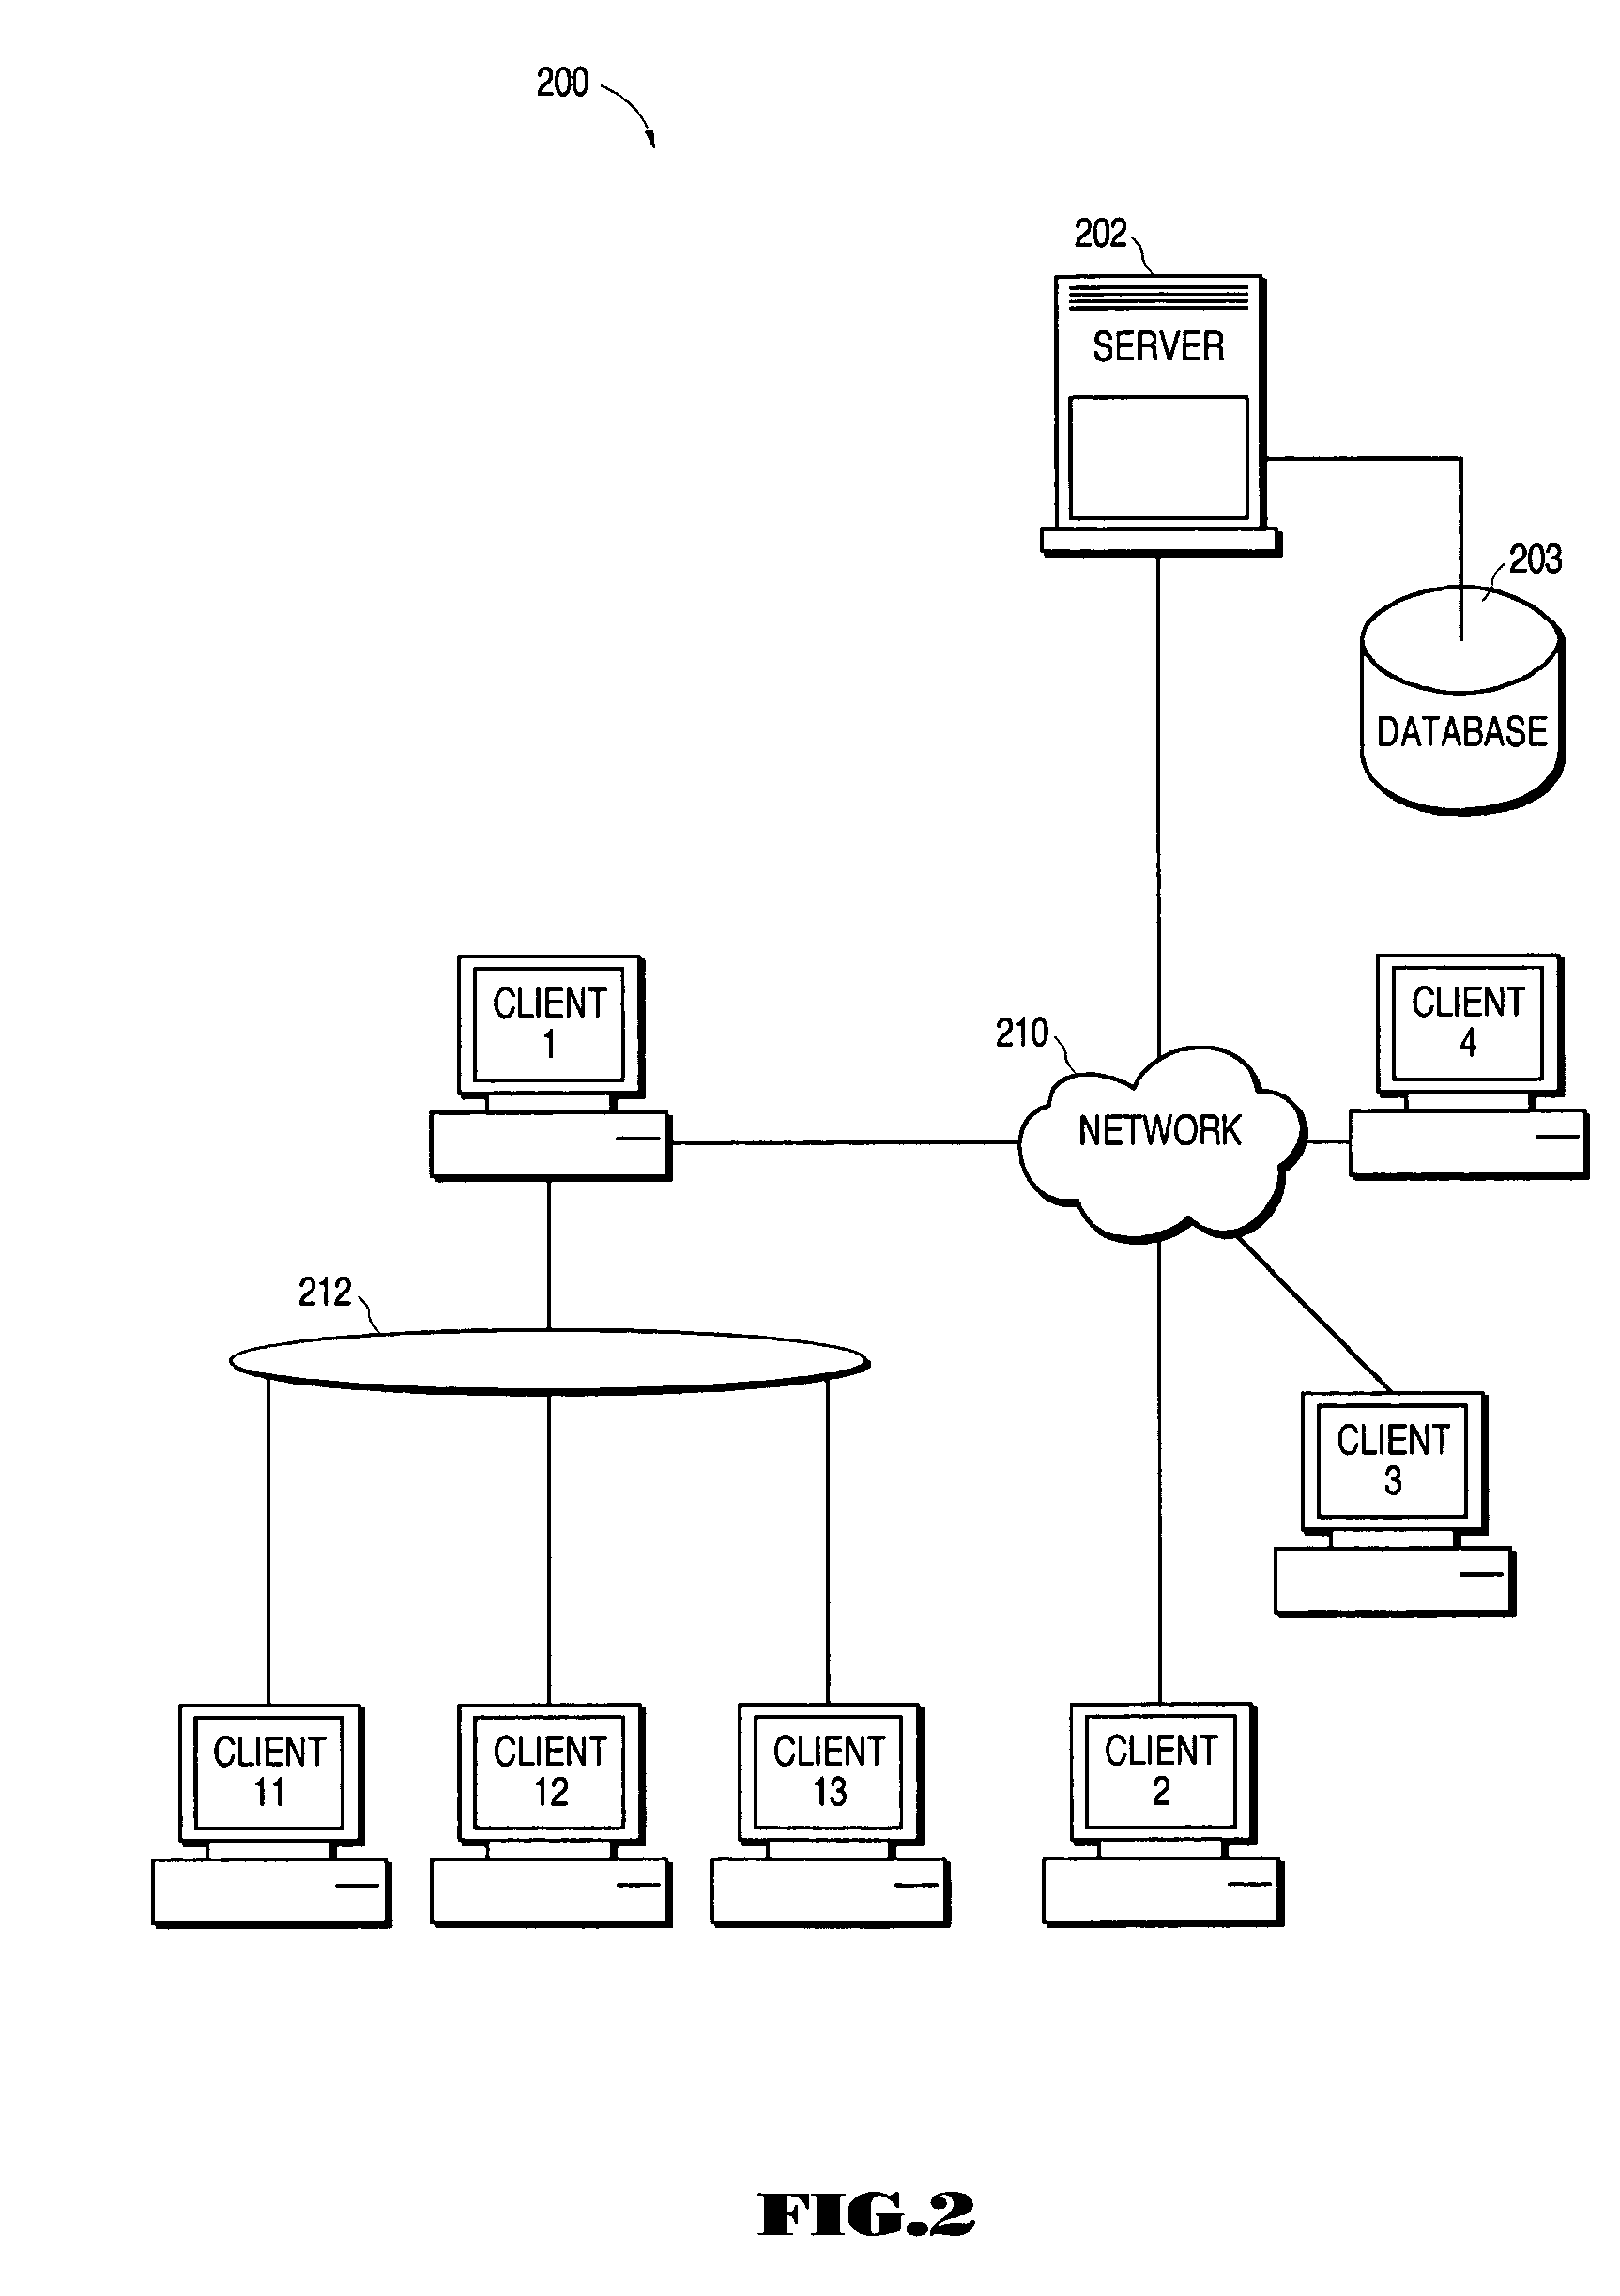 Enterprise security management system using hierarchical organization and multiple ownership structure